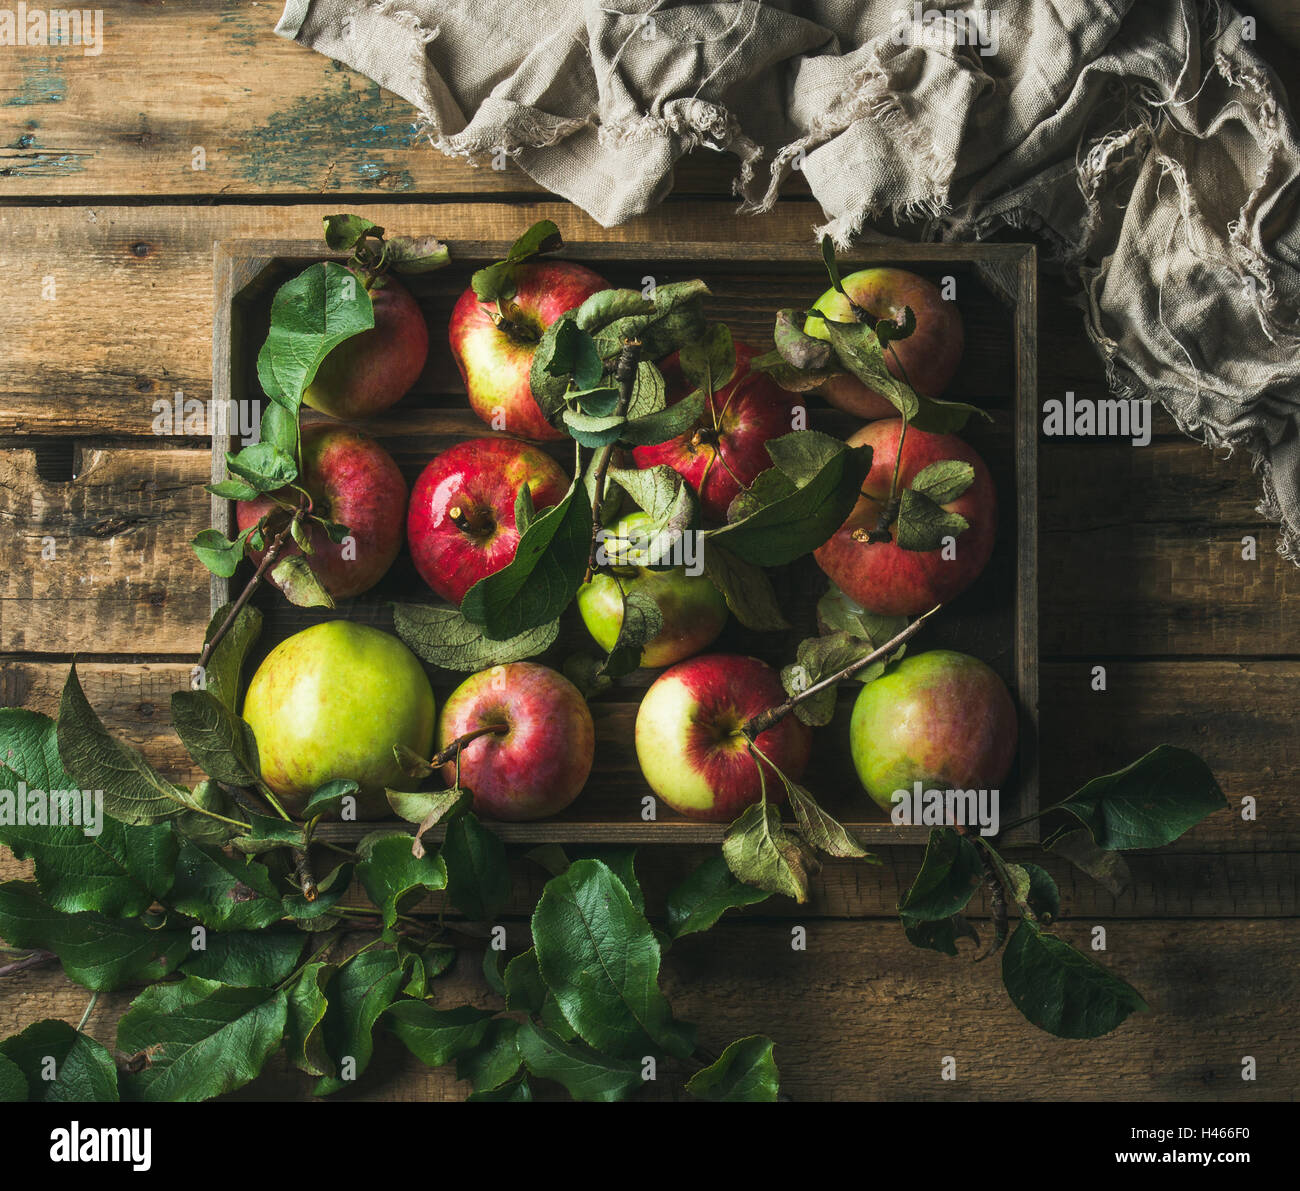 Seasonal garden harvest apples with green leaves in wooden tray Stock Photo